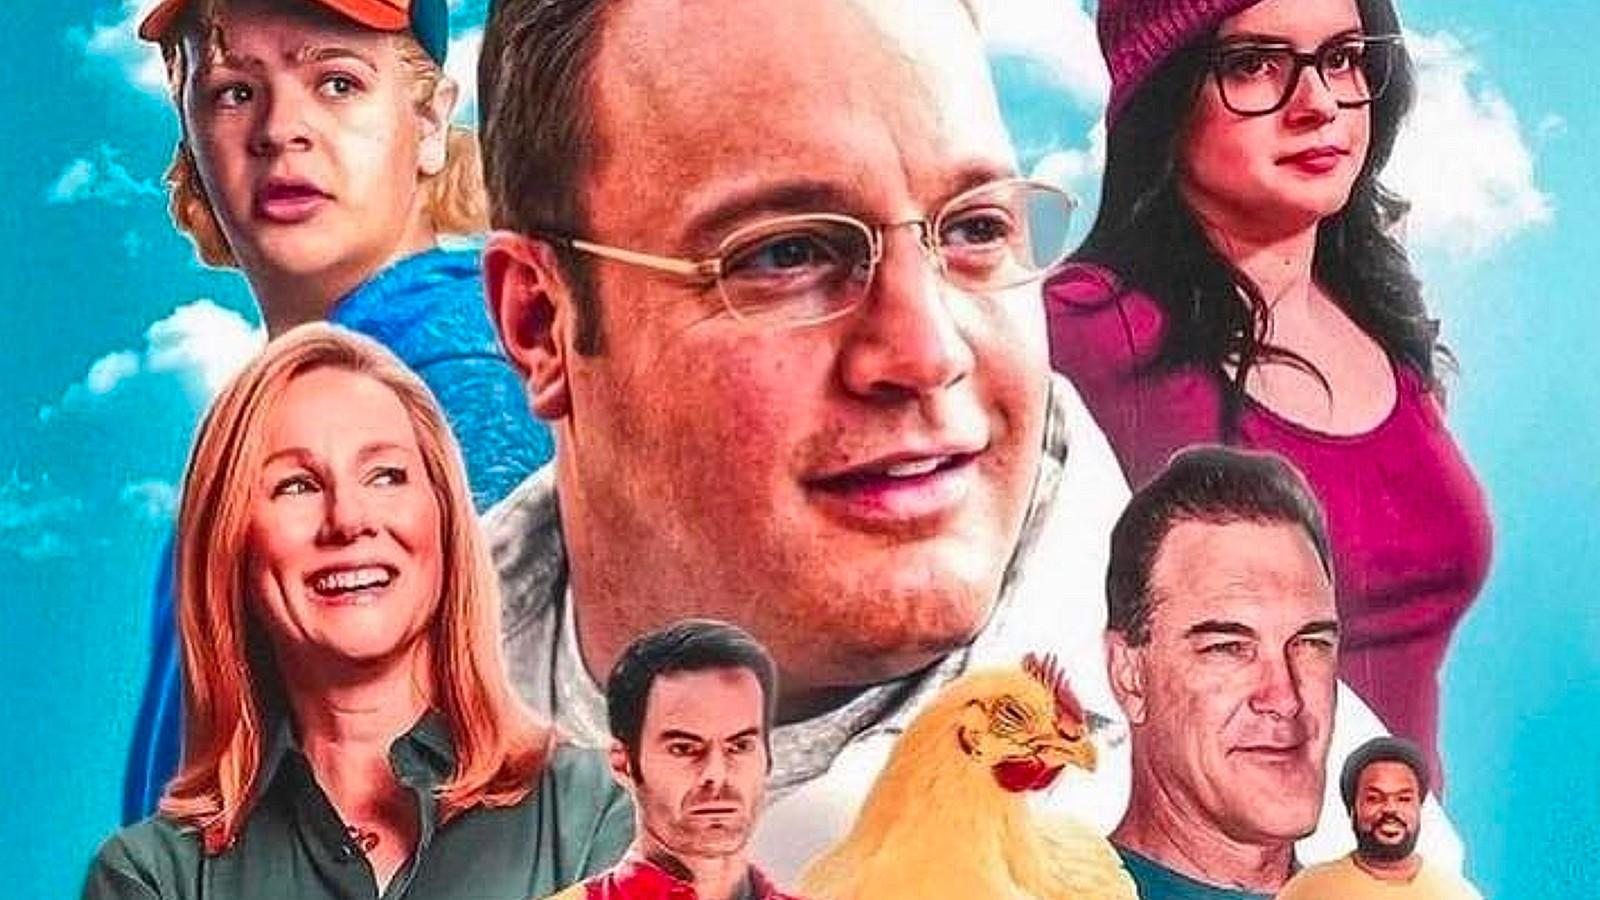 The supposed cast of the live-action Family Guy movie